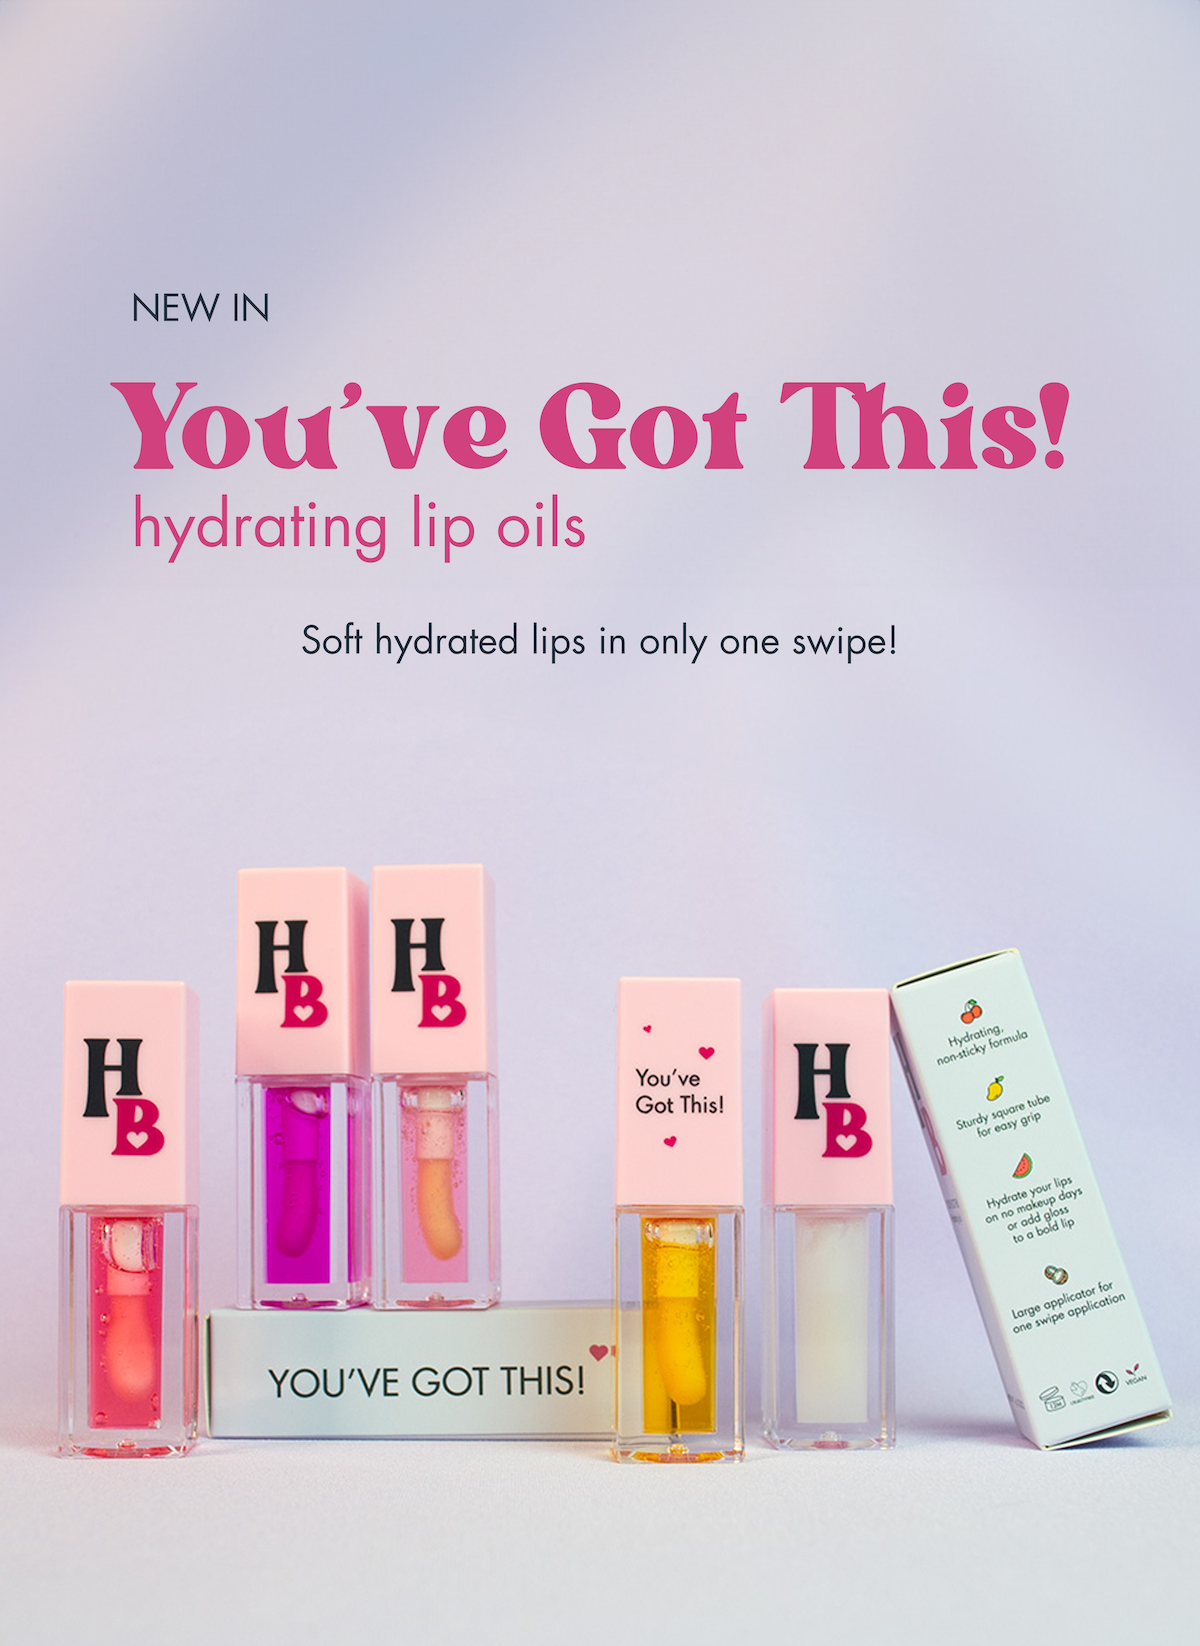 Visual of the entire lip oil collection with the text "New in: You've Got This! hydrating lip oils - soft hydrated lips in only one swipe!"